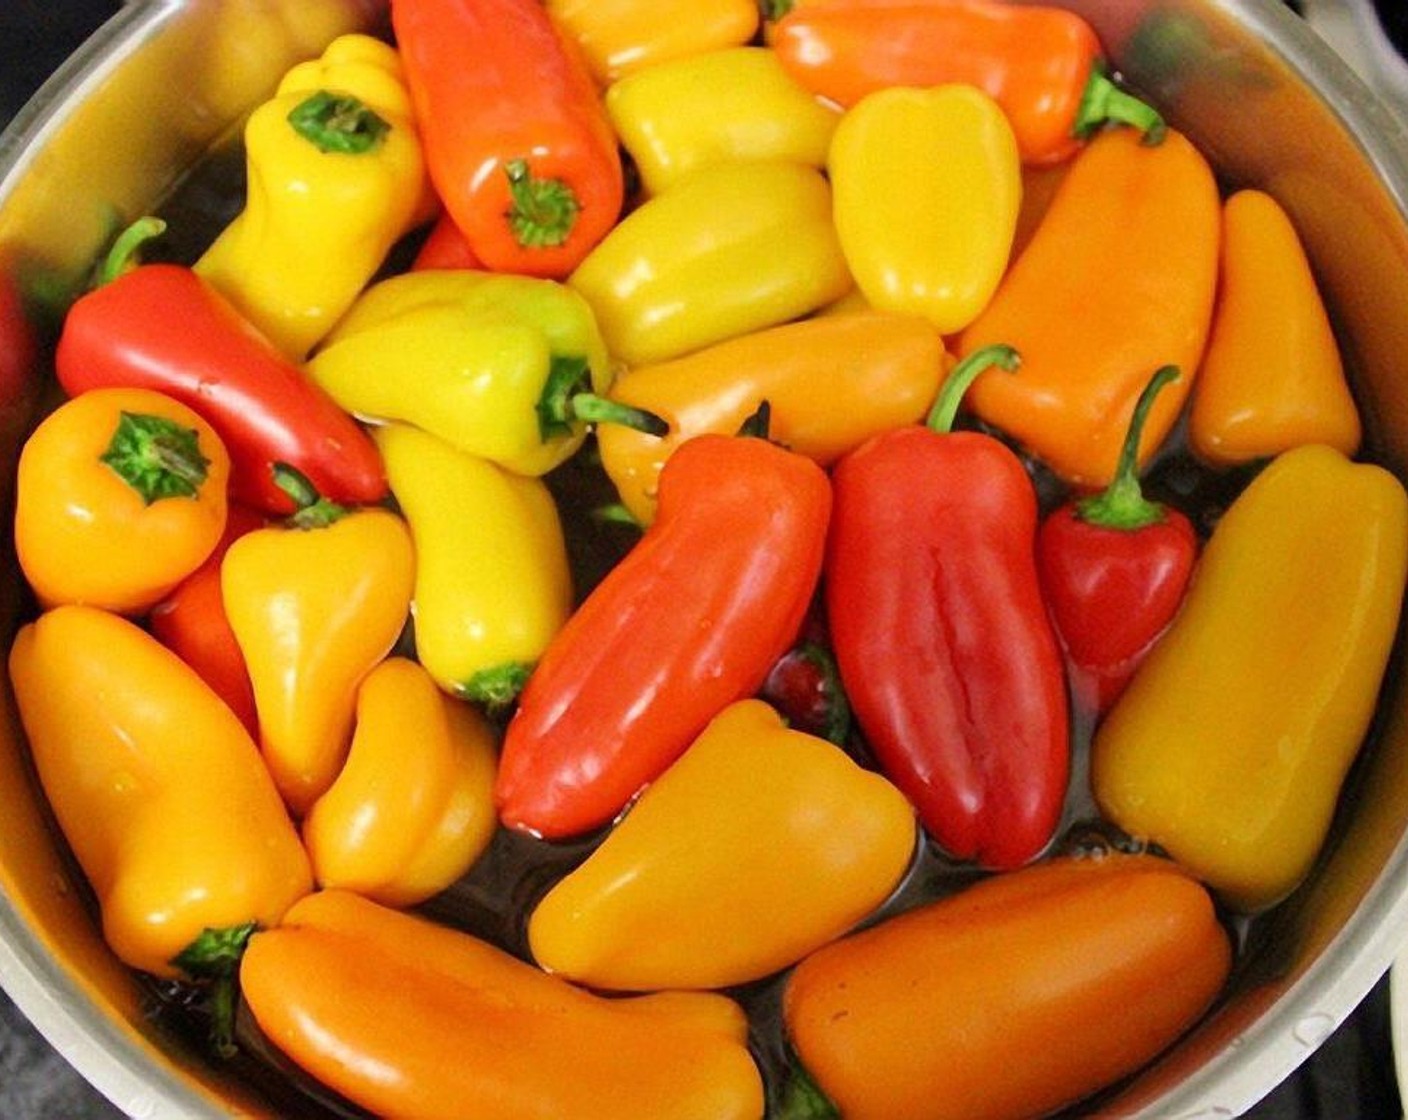 step 2 Bring a large pot of water to a boil. Add the Mini Peppers and blanch for about 3 minutes. Using a slotted spoon, take the peppers out of the boiling water.